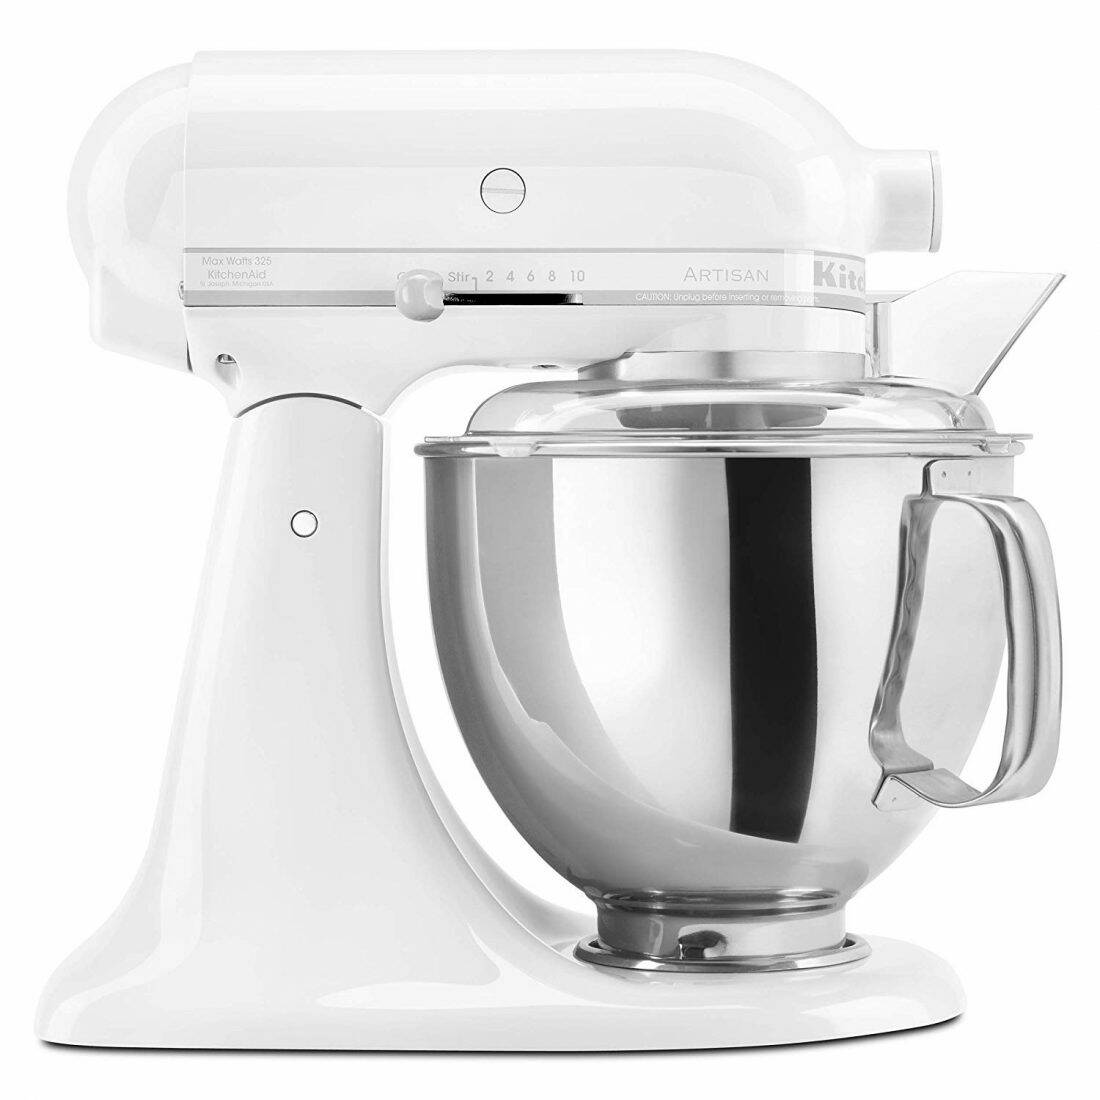 Picture of a white KitchenAid stand mixer.